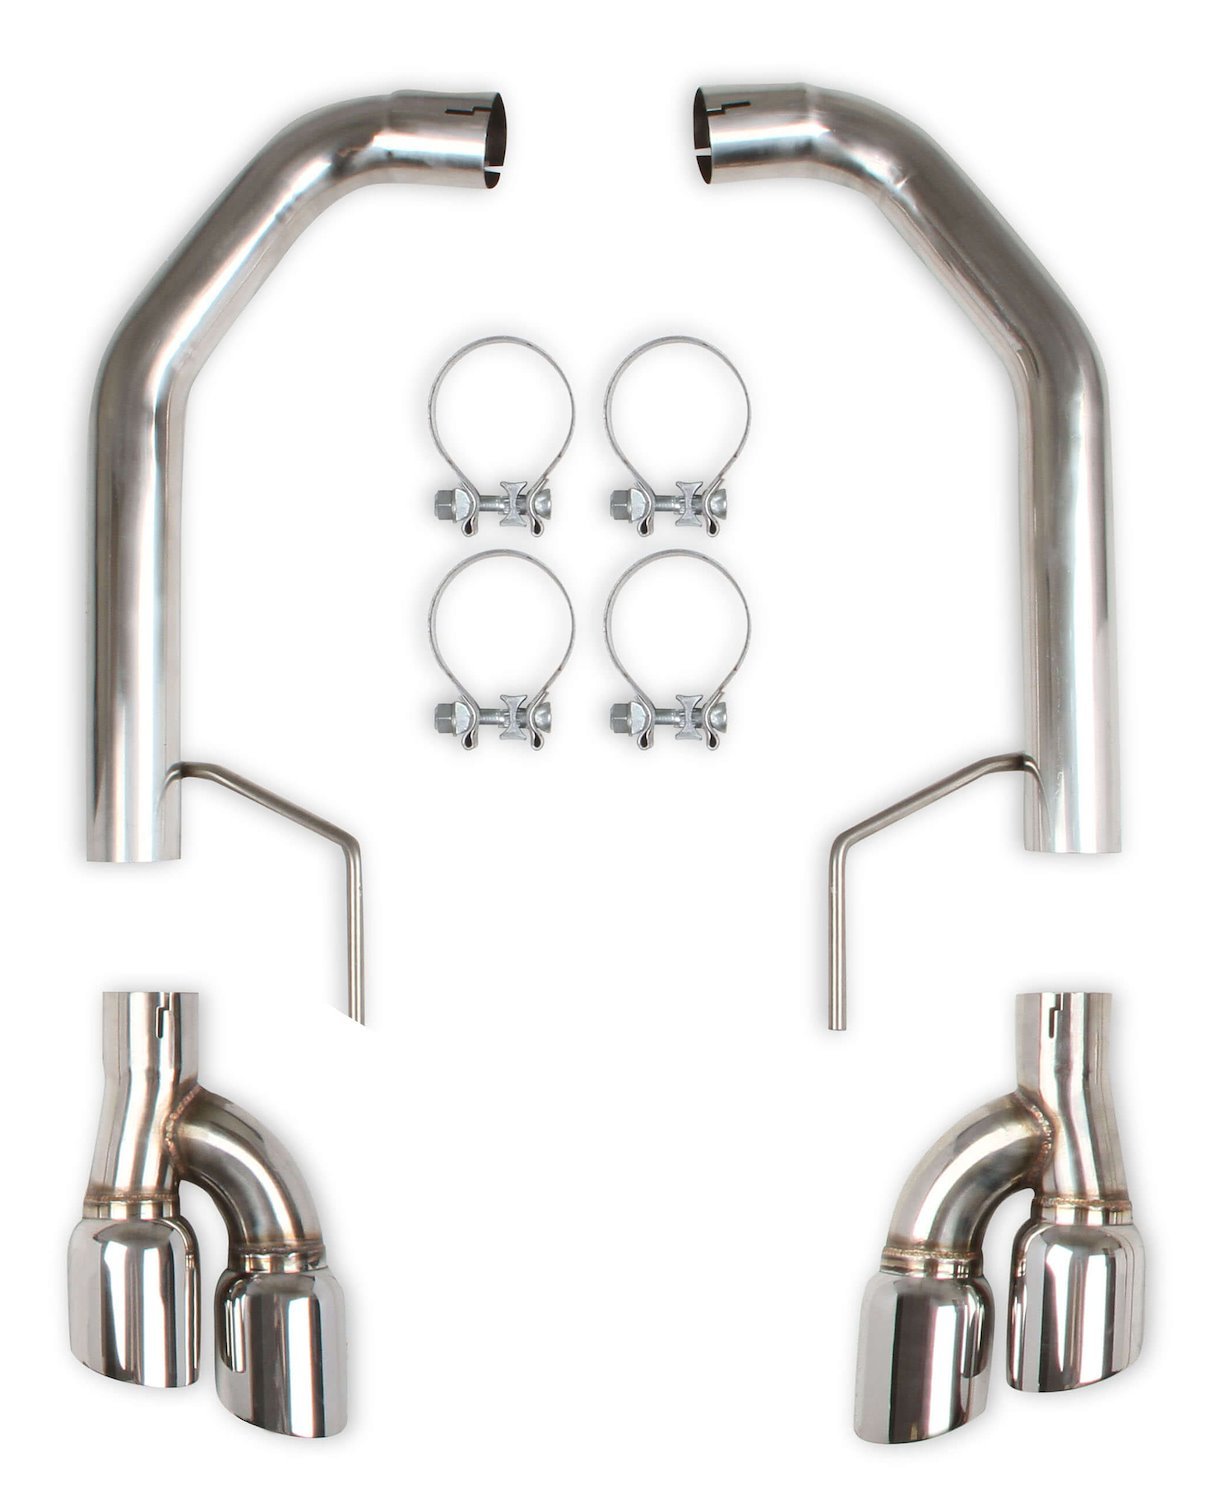 Axle-Back Exhaust System - No Mufflers